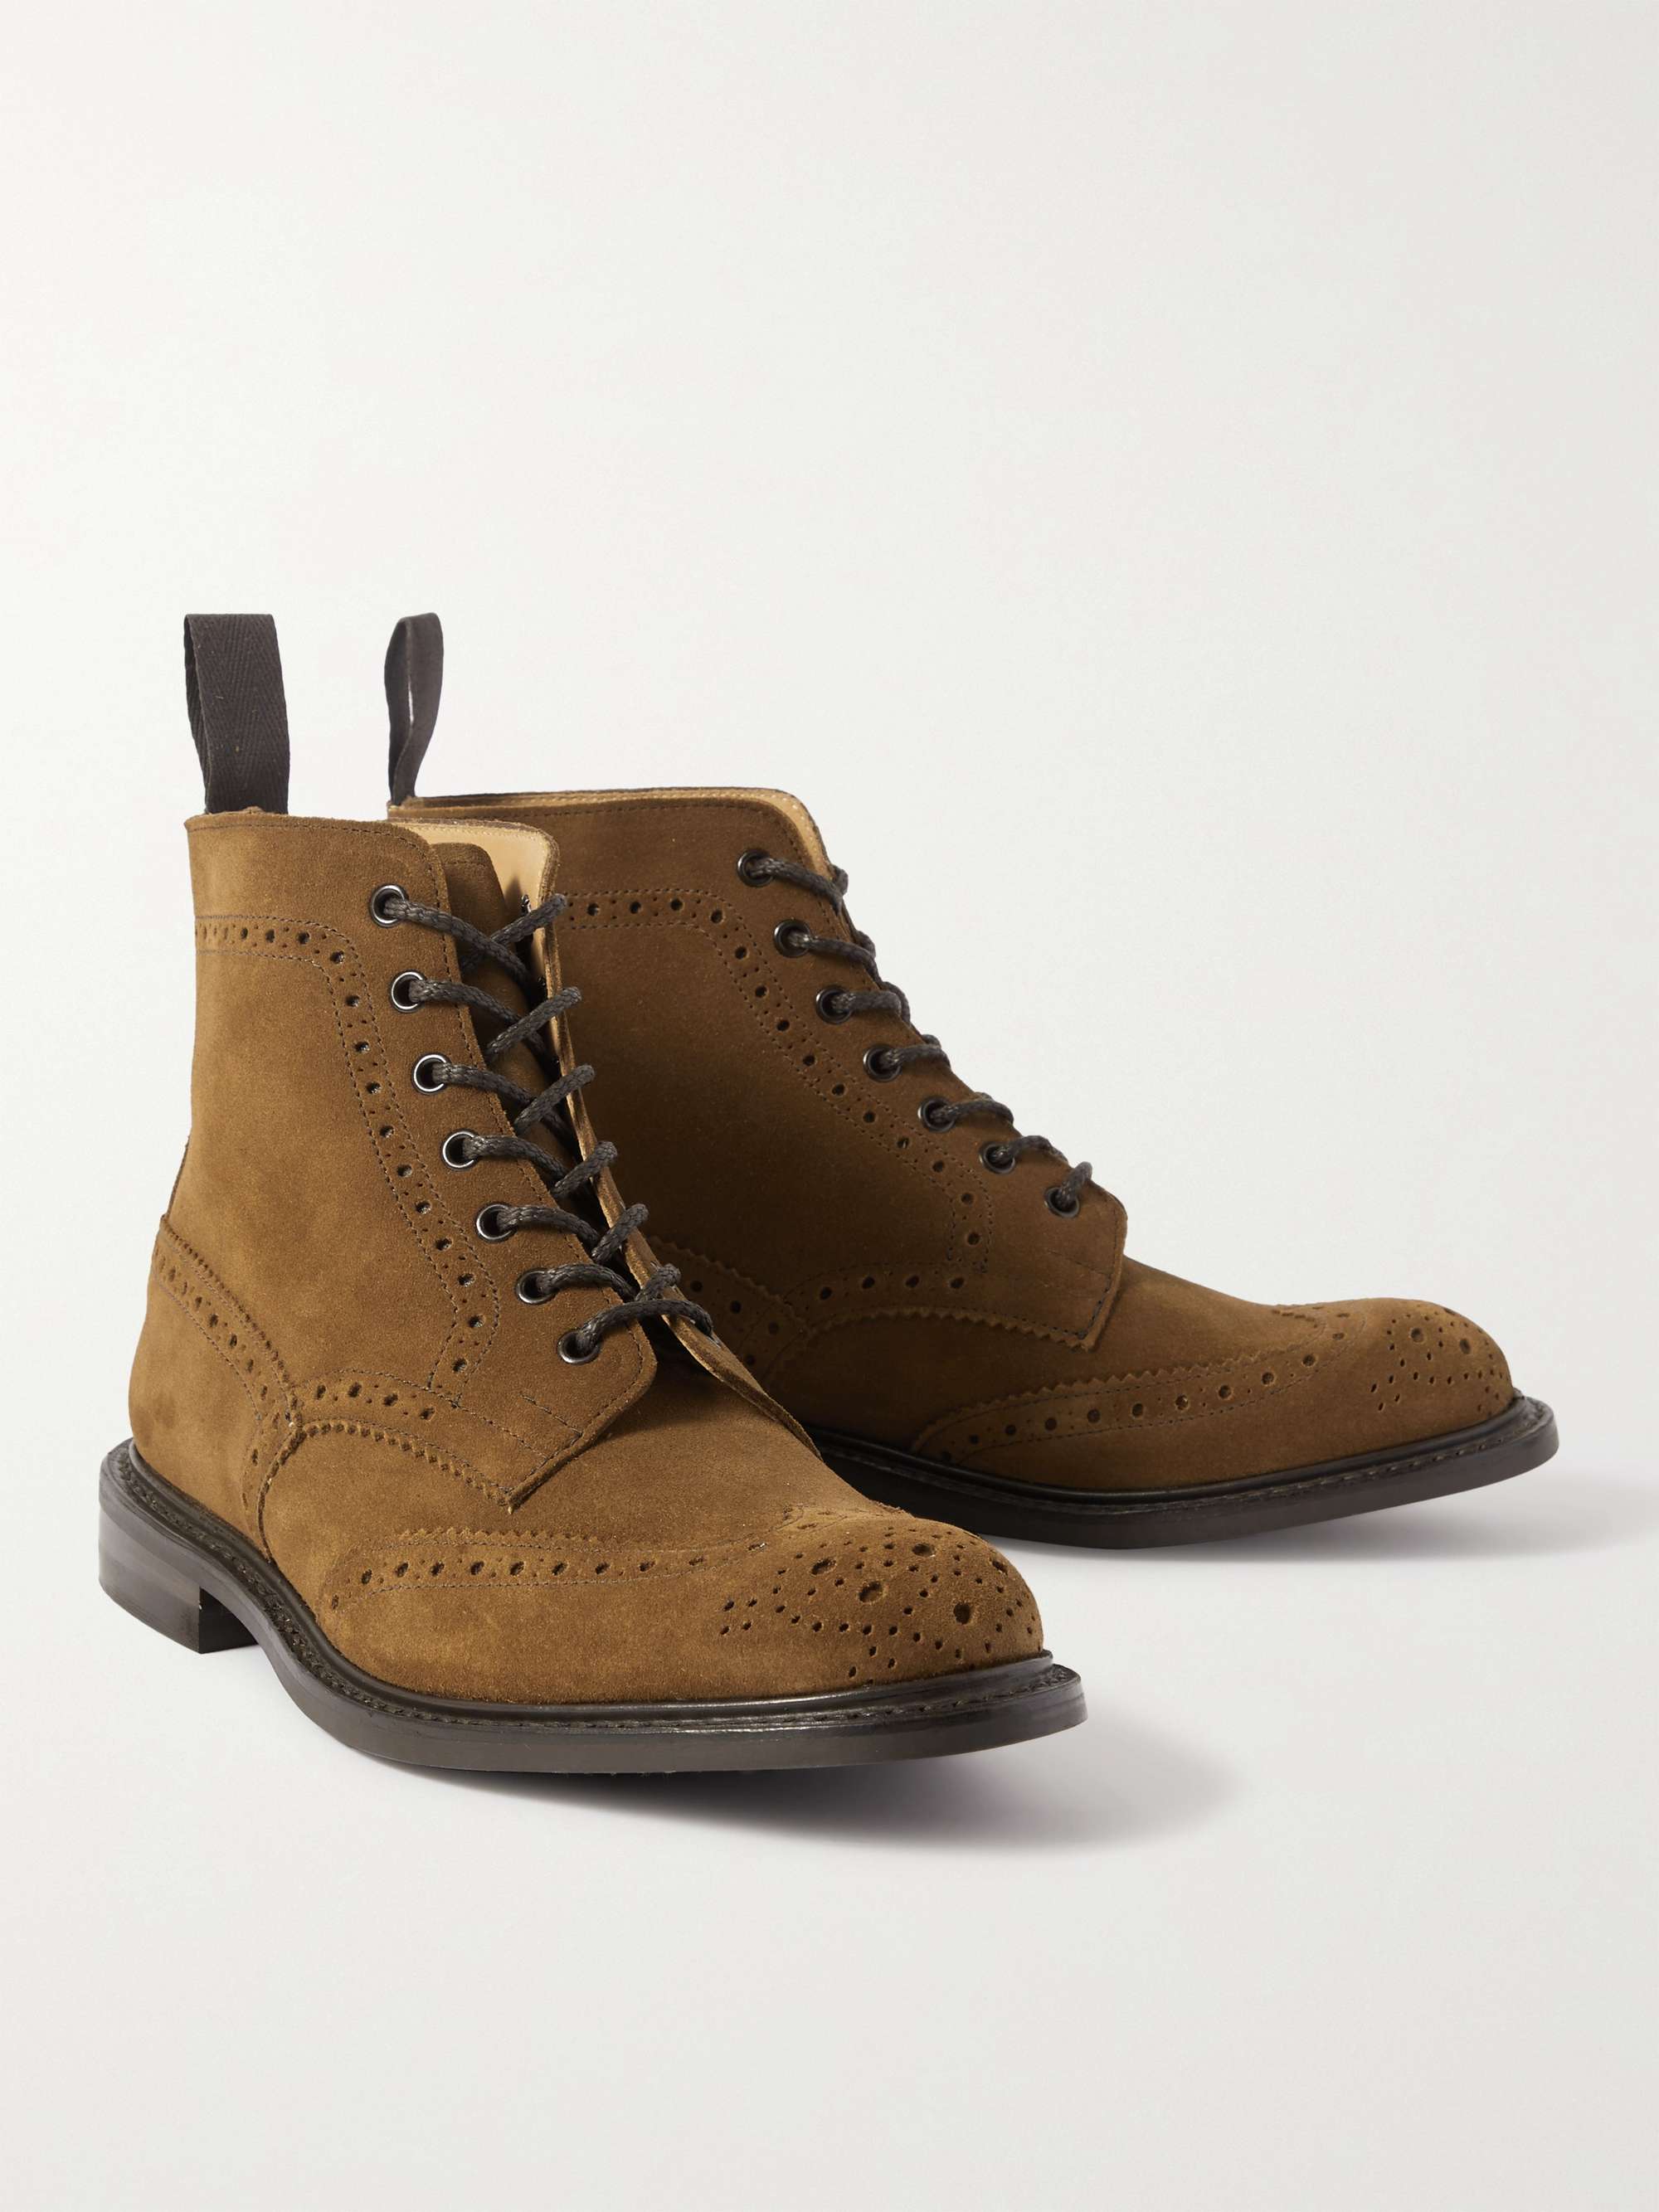 TRICKER'S Stow Suede Brogue Boots